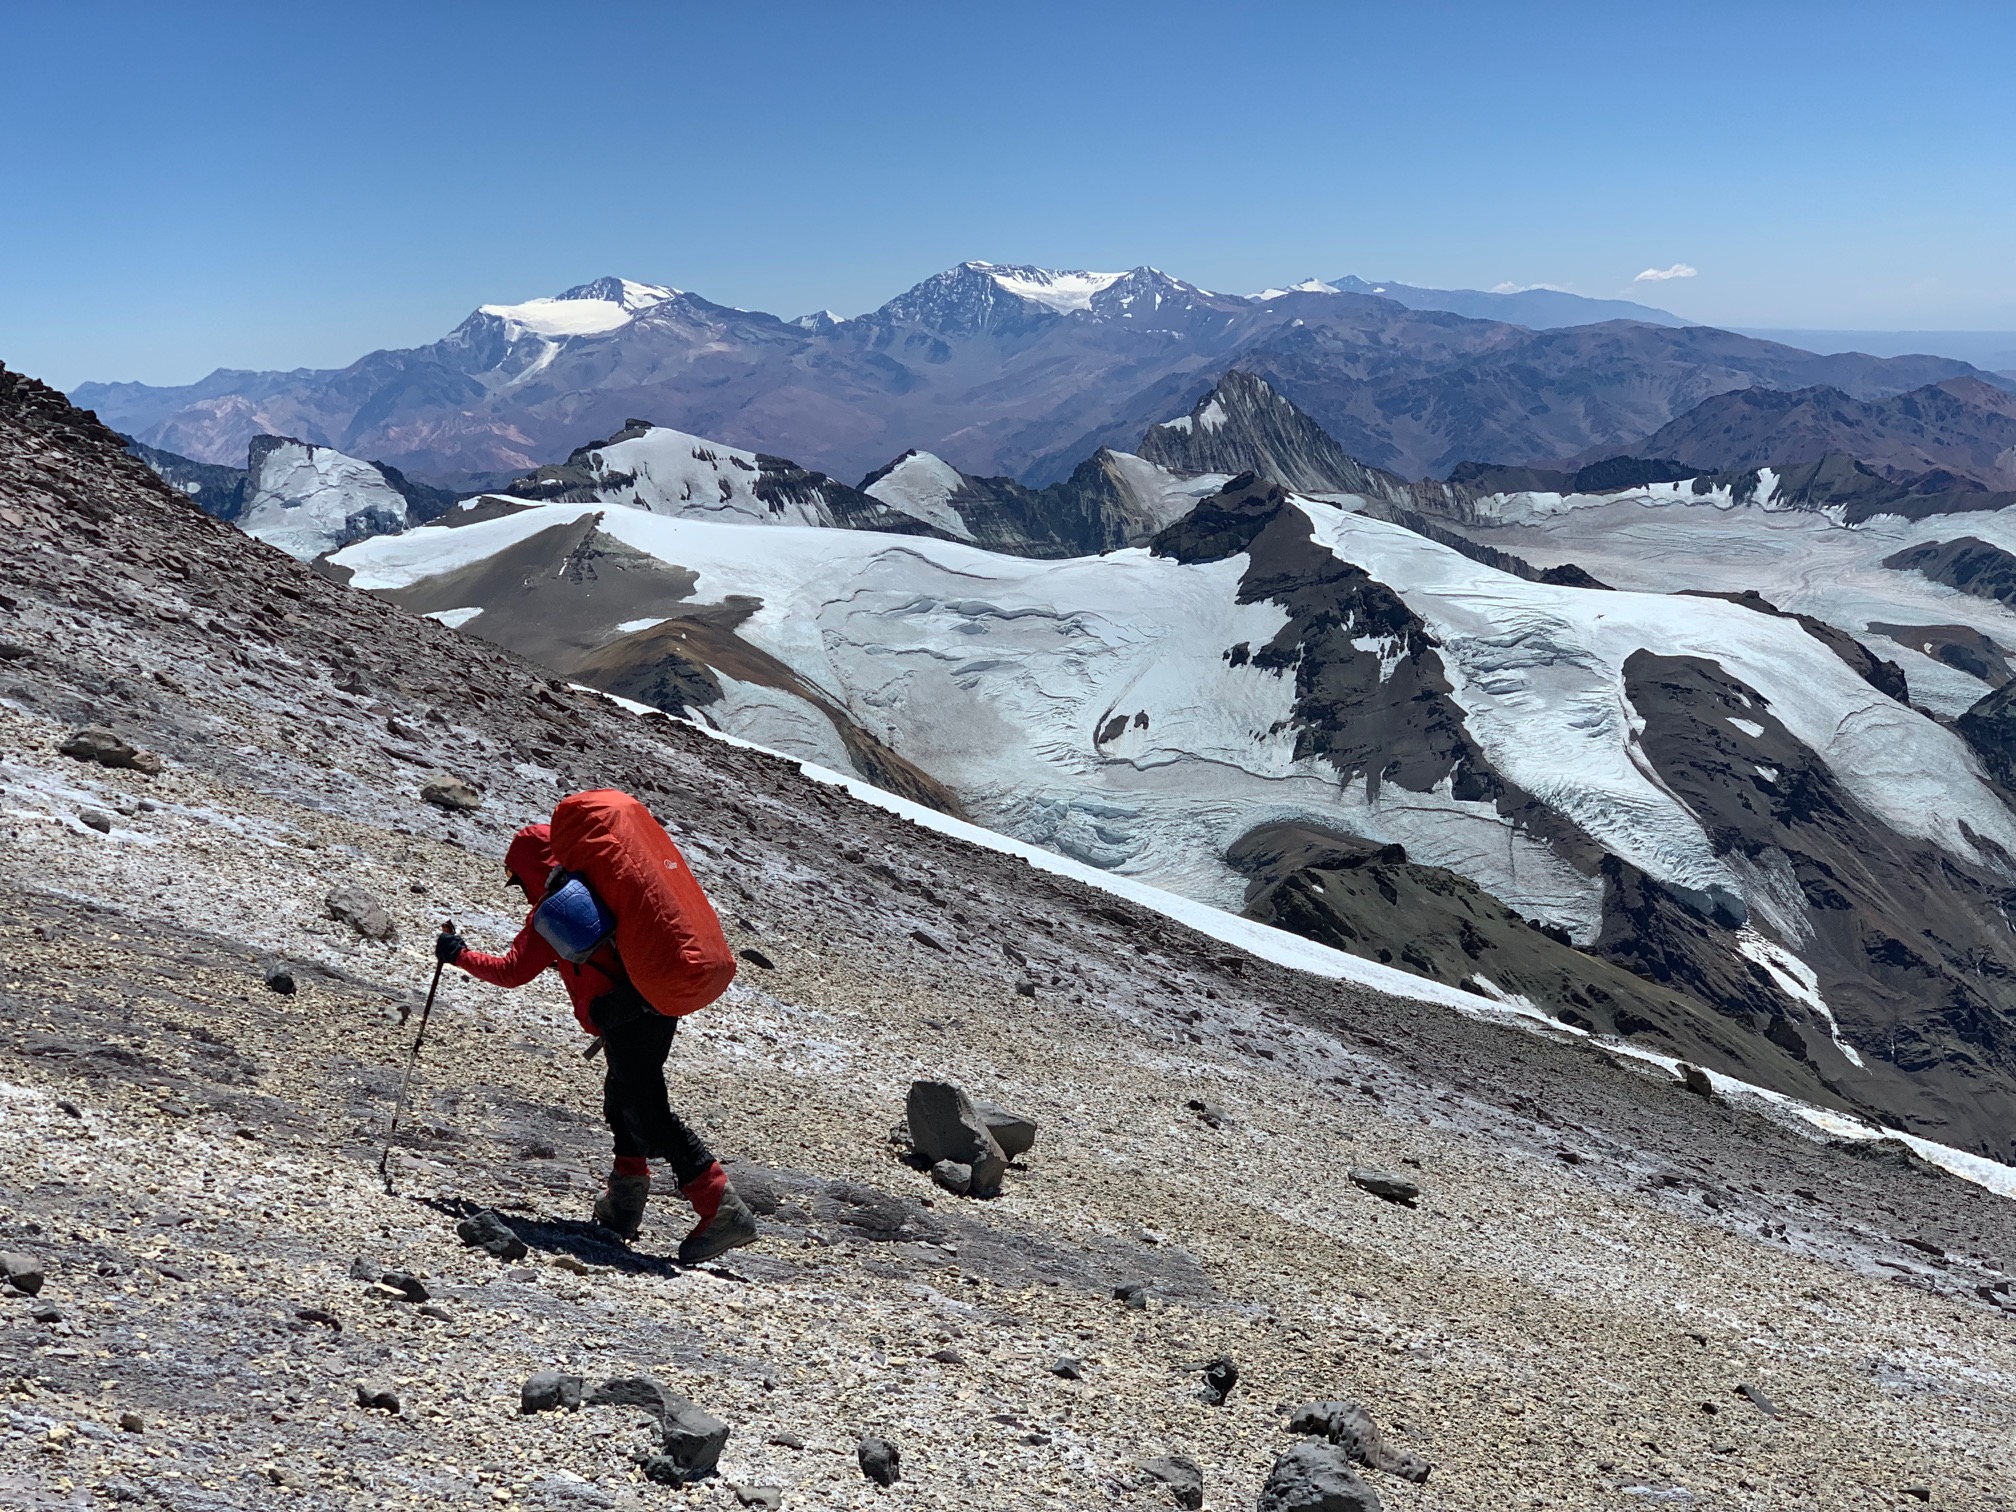 The route up Aconcagua 